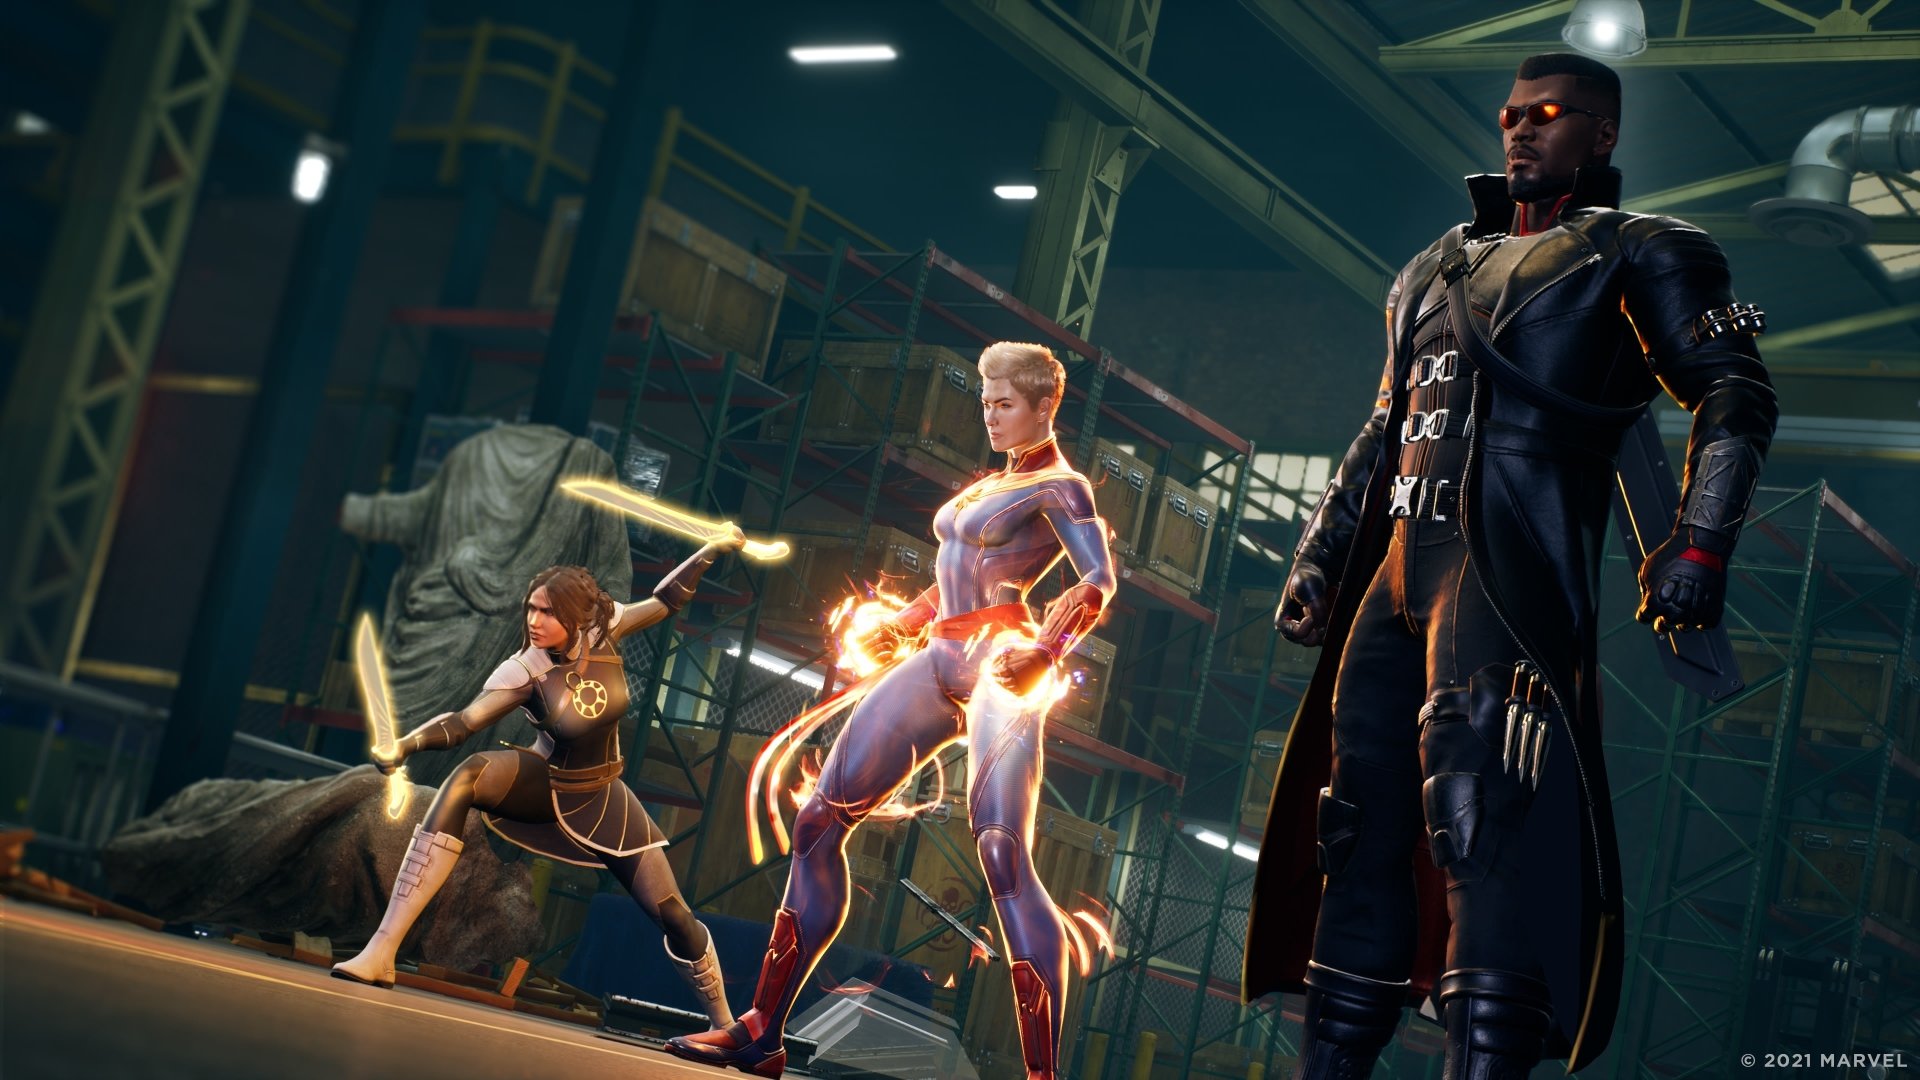 Marvel's Midnight Suns release date, trailer, gameplay and what we